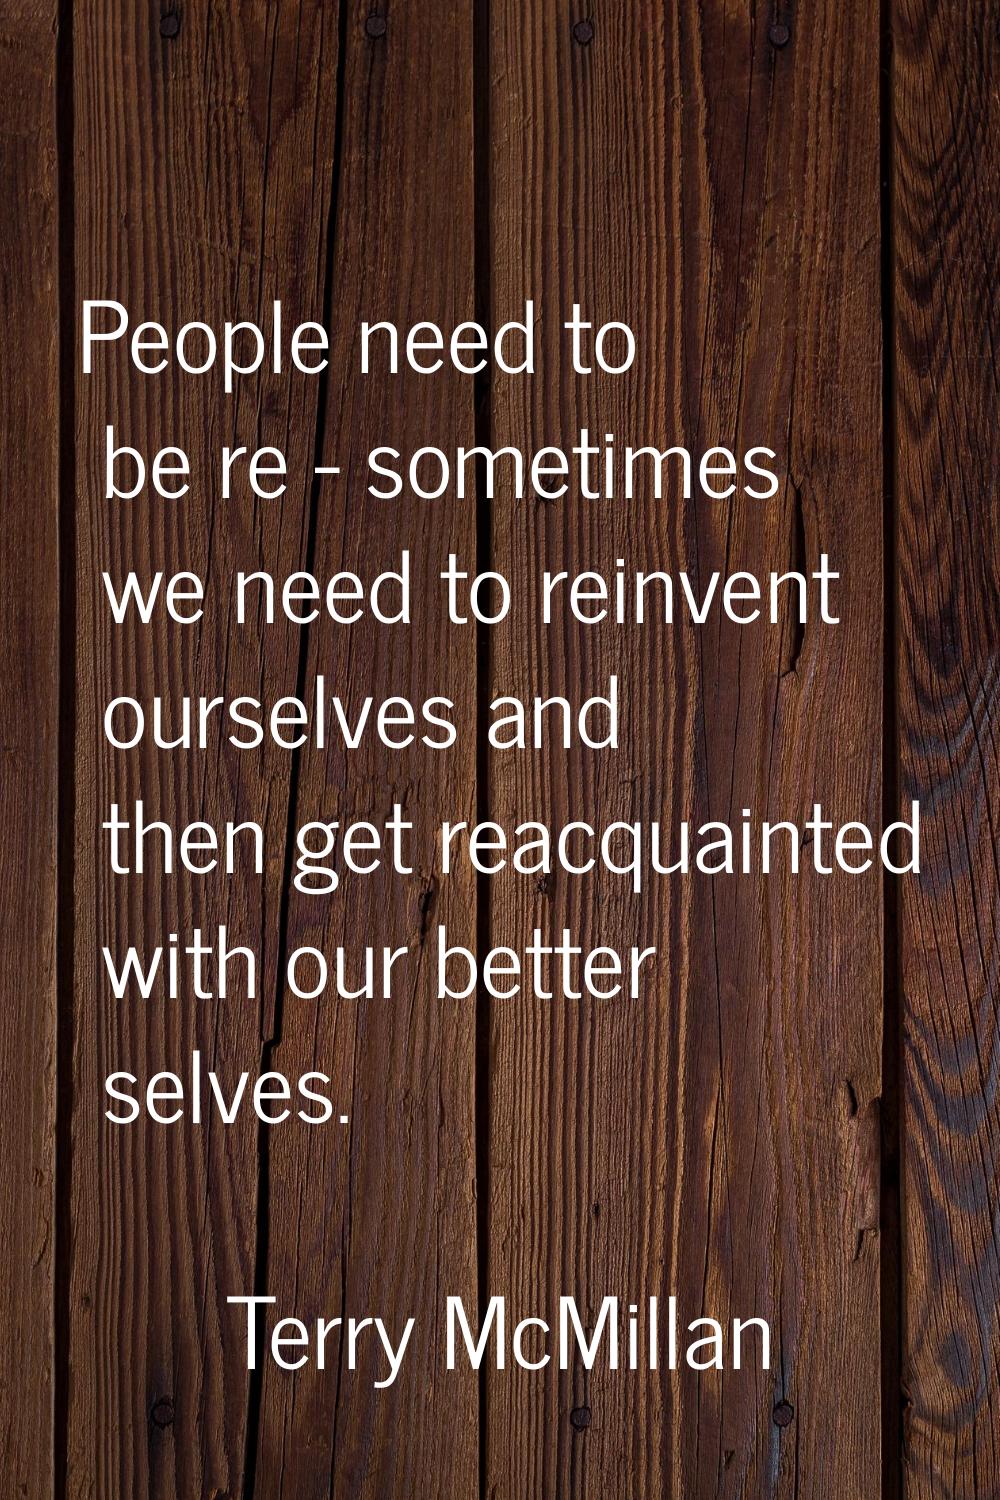 People need to be re - sometimes we need to reinvent ourselves and then get reacquainted with our b